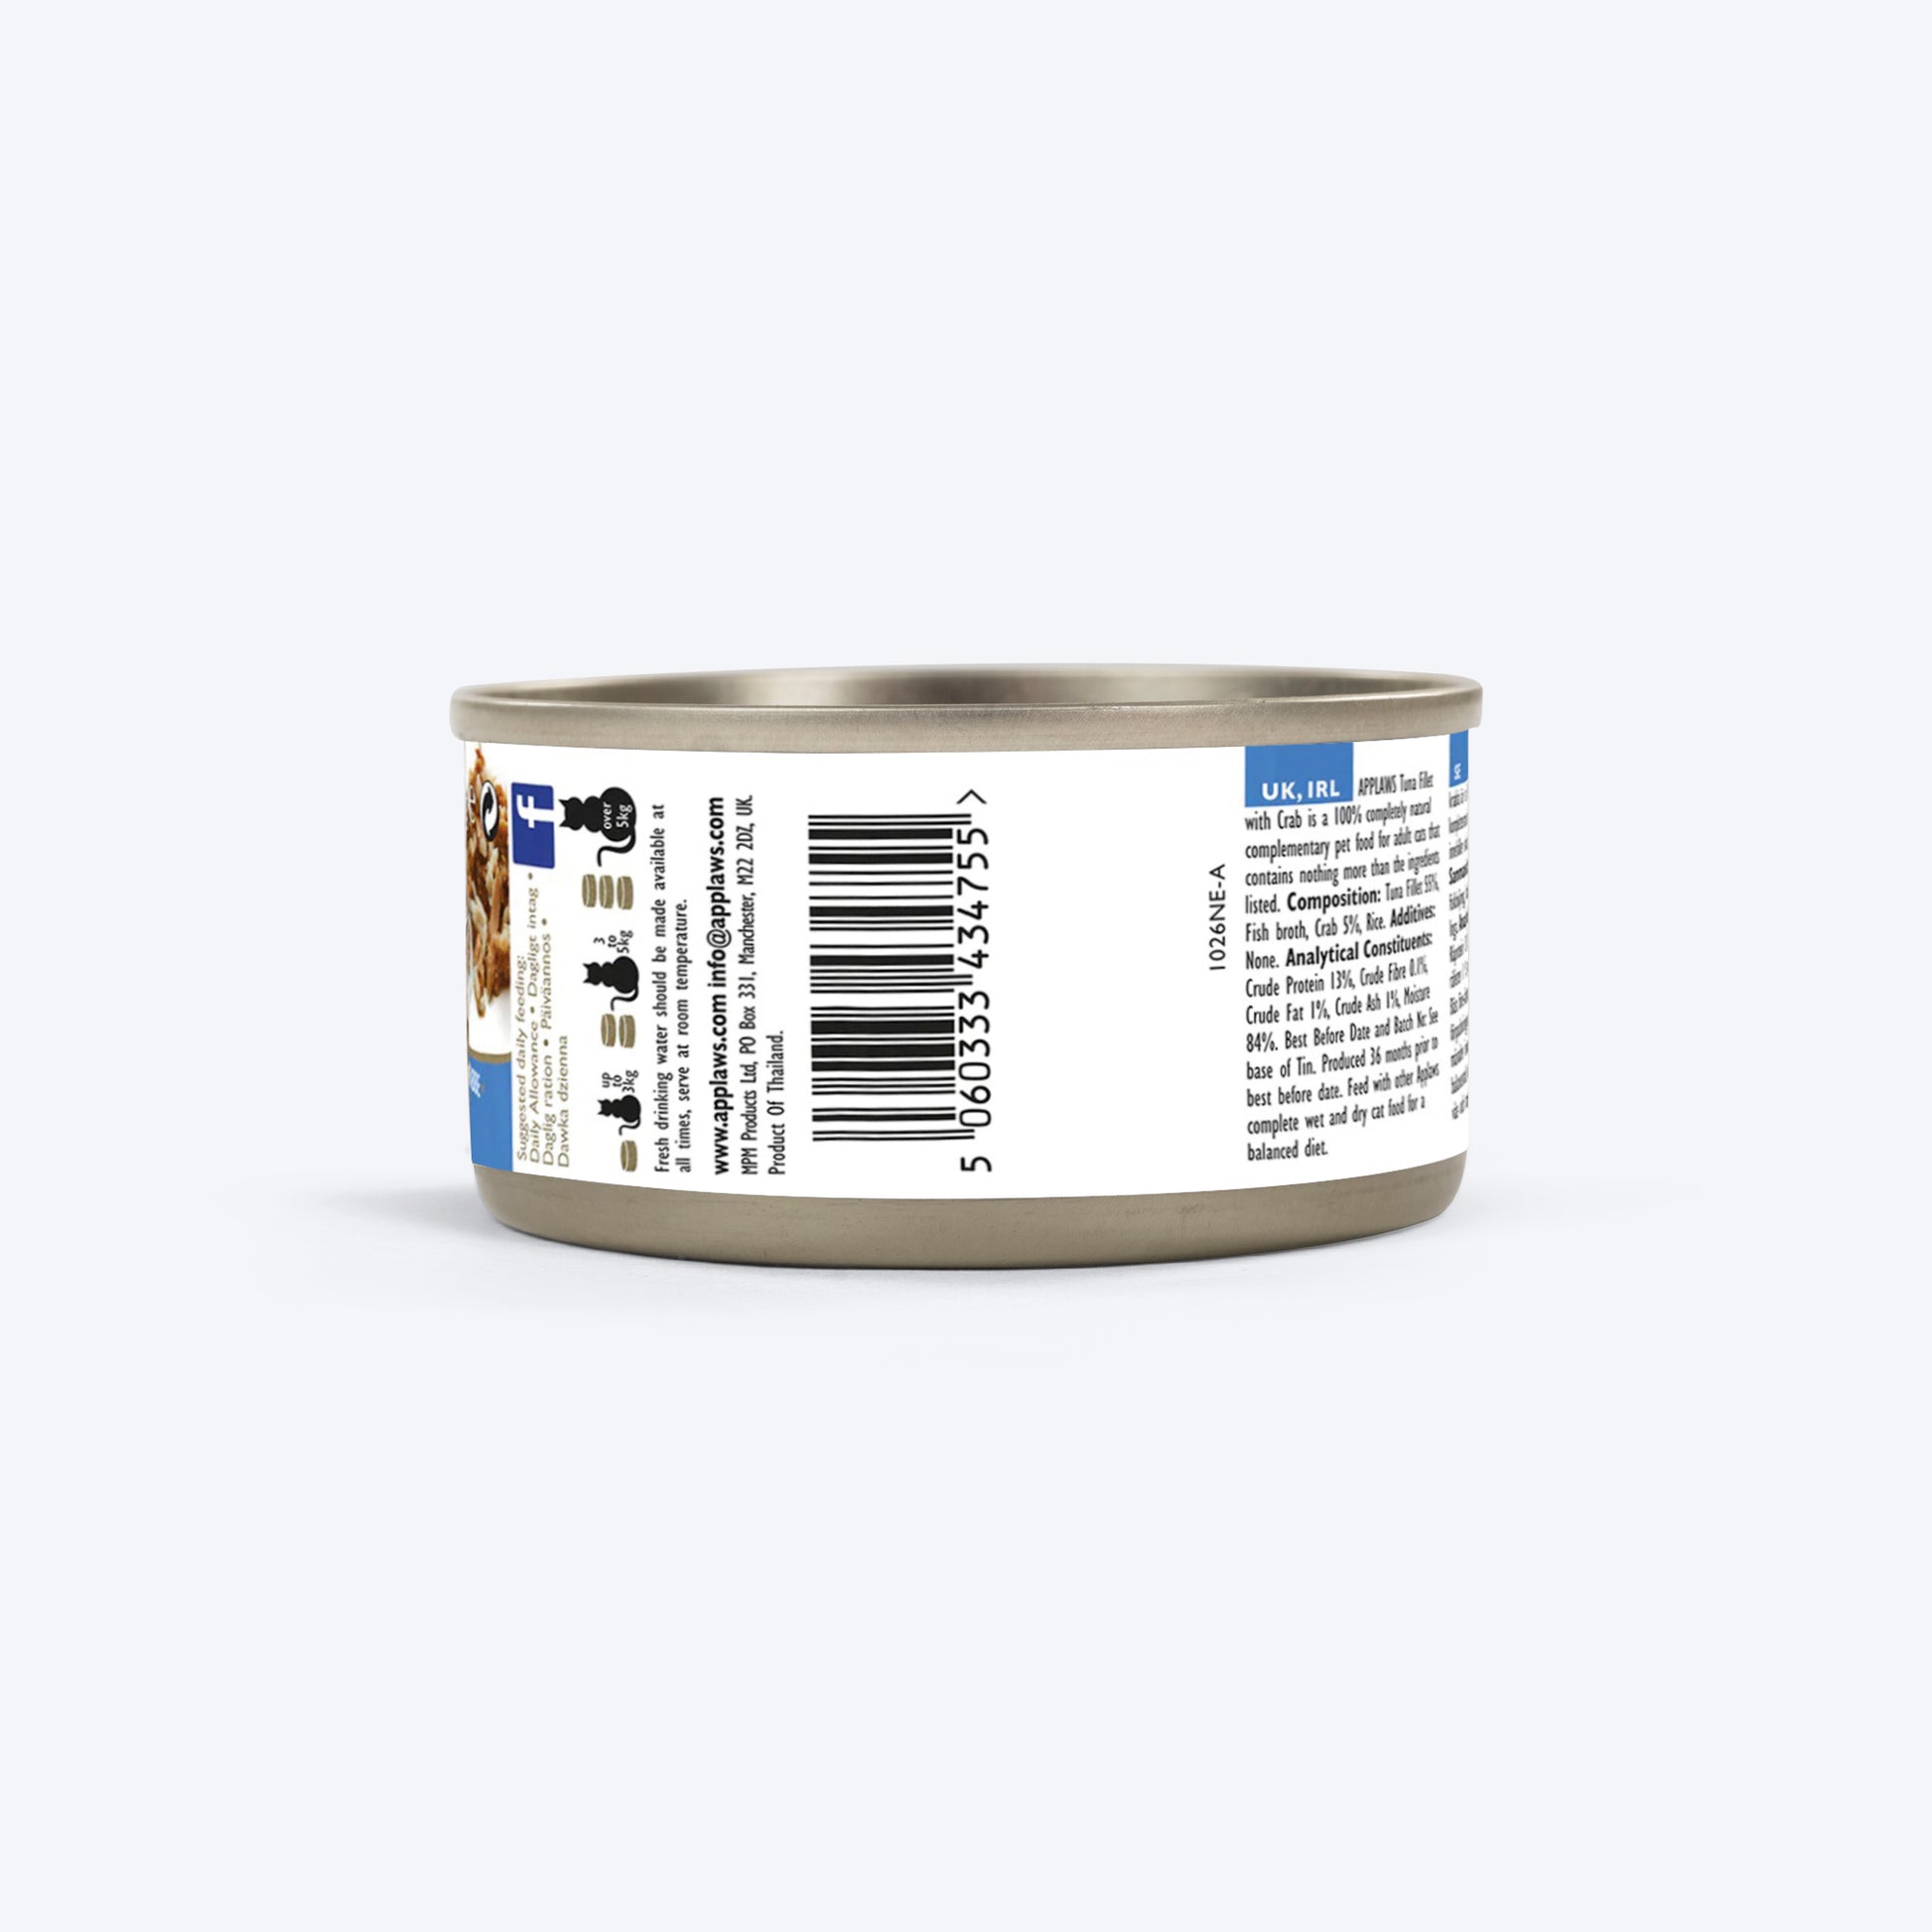 Applaws 70% Tuna Fillet with Crab Natural Wet Cat Food - 70 g_07